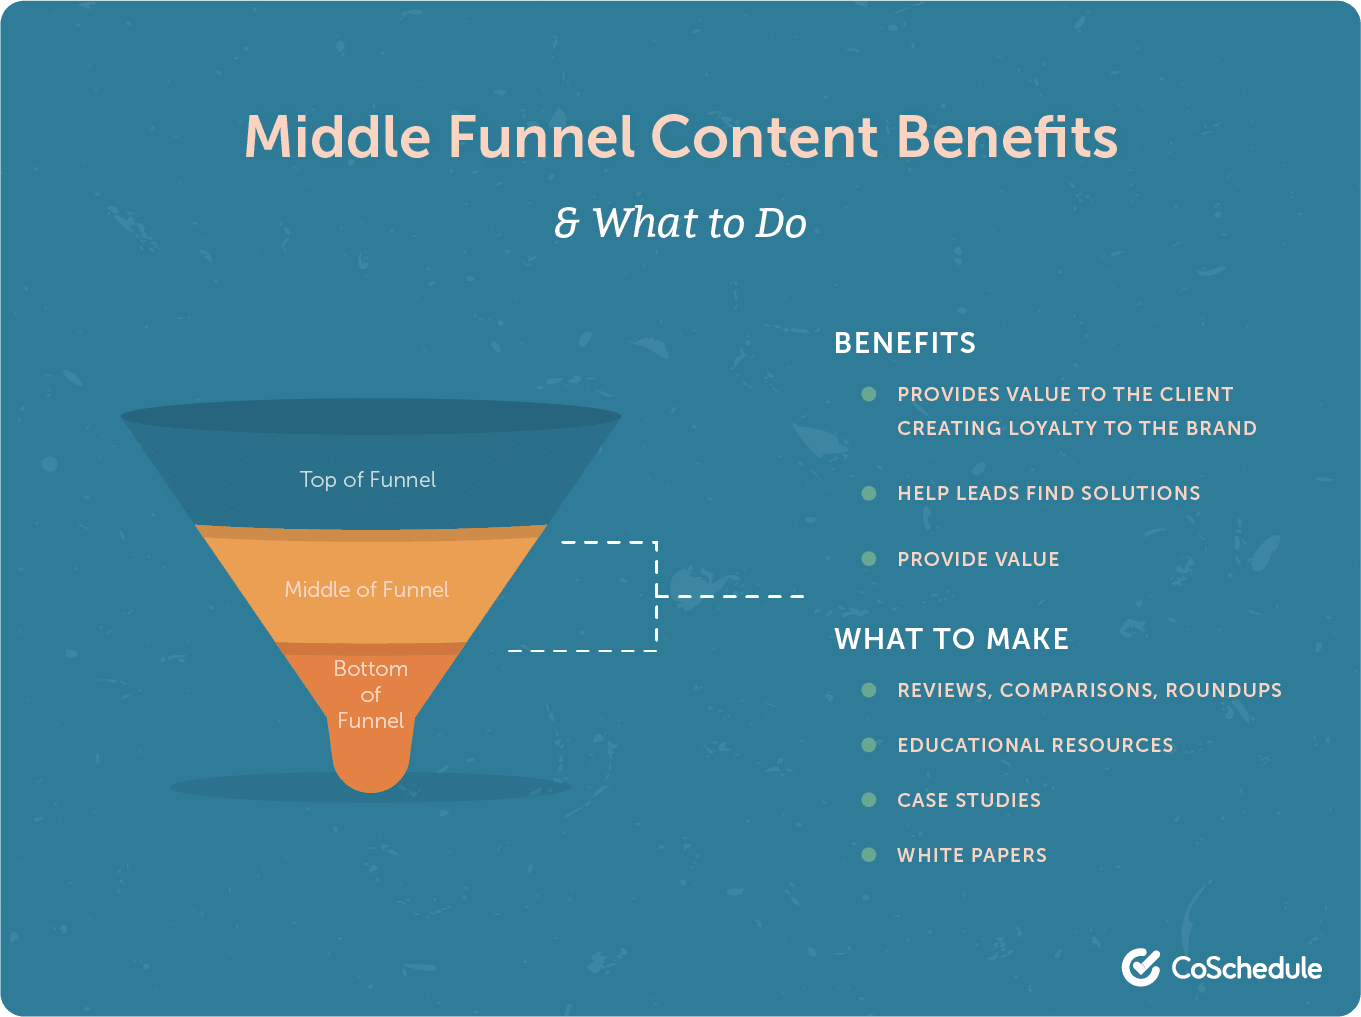 Middle funnel content